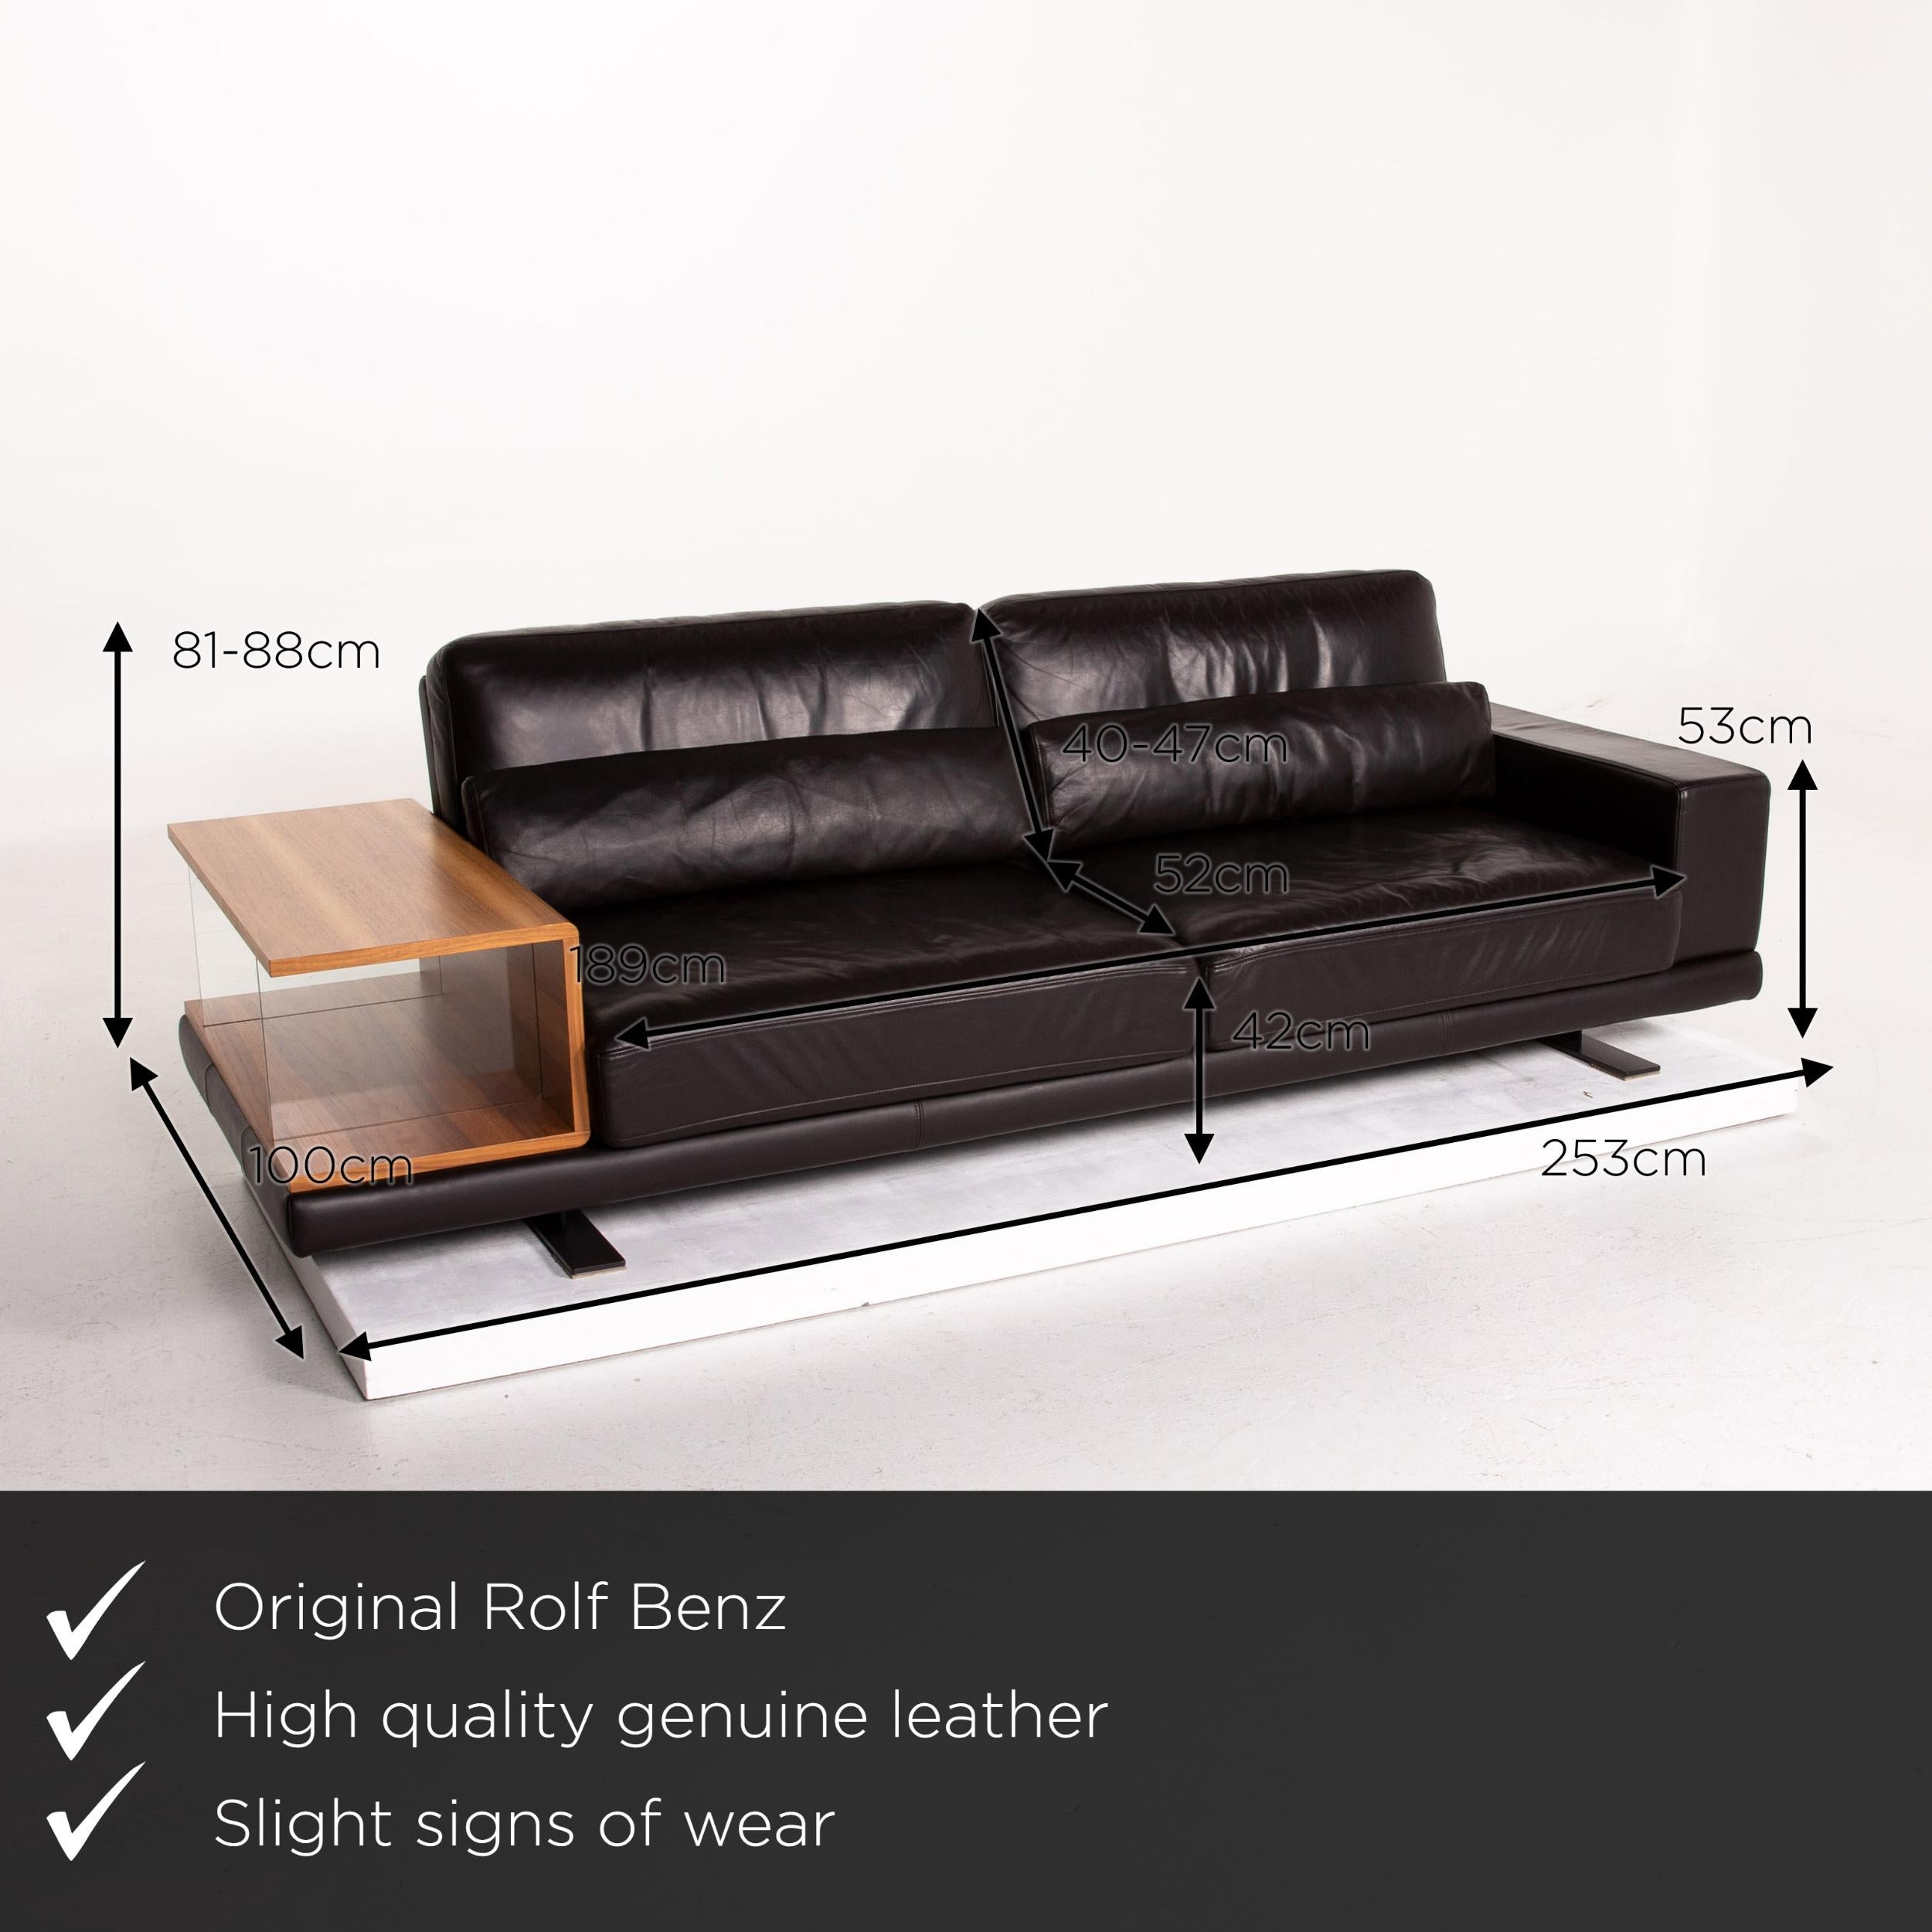 We present to you a Rolf Benz Vero leather sofa brown dark brown three-seat table shelf.


 Product measurements in centimeters:
 

Depth 100
Width 253
Height 81
Seat height 42
Rest height 53
Seat depth 52
Seat width 189
Back height